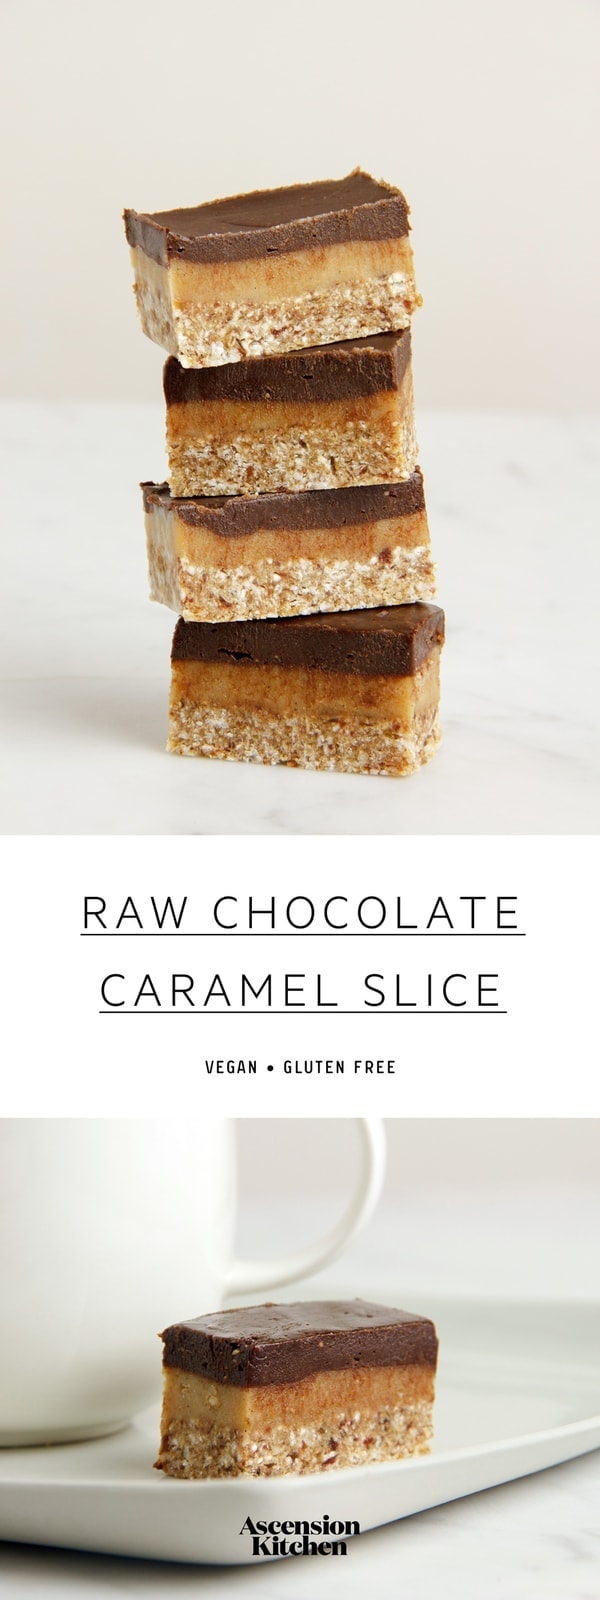 My World famous Raw Chocolate Caramel Slice. This lush raw dessert has a buckwheat and coconut ‘biscuit’ base, with a caramel filling made from macadamia nuts, cashew, maple and lemon, with a thick and dreamy chocolate icing. #vegantreats #vegandesserts #vegansweet #vegandessertideas #rawvegan #caramelslice #dairyfreedesserts #glutenfreedesserts #rawcaramelslice #caramelslicevegan #vegancaramel #healthydessertideas #dessertideas #treatideas #chocolatecaramelslice #unbakeslice #AscensionKitchen // Pin to your own inspiration board //